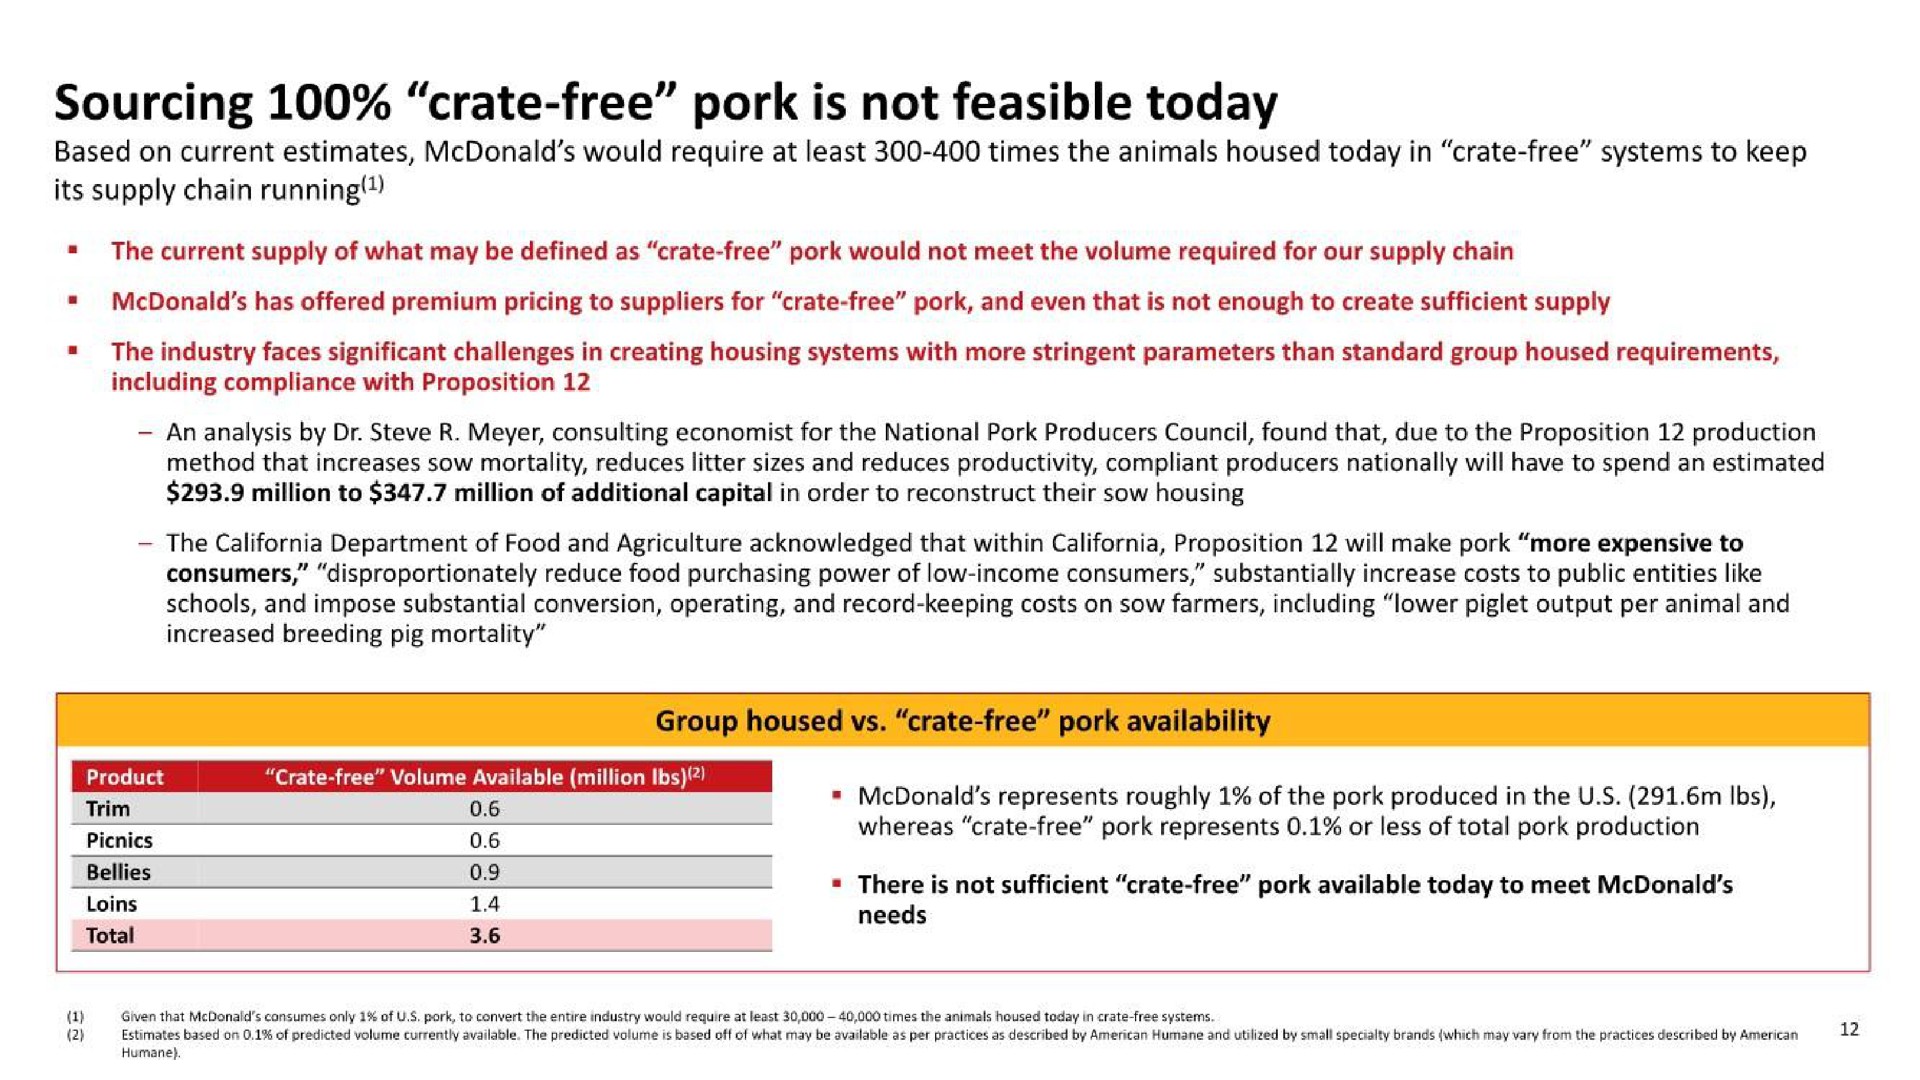 sourcing crate free pork is not feasible today | McDonald's